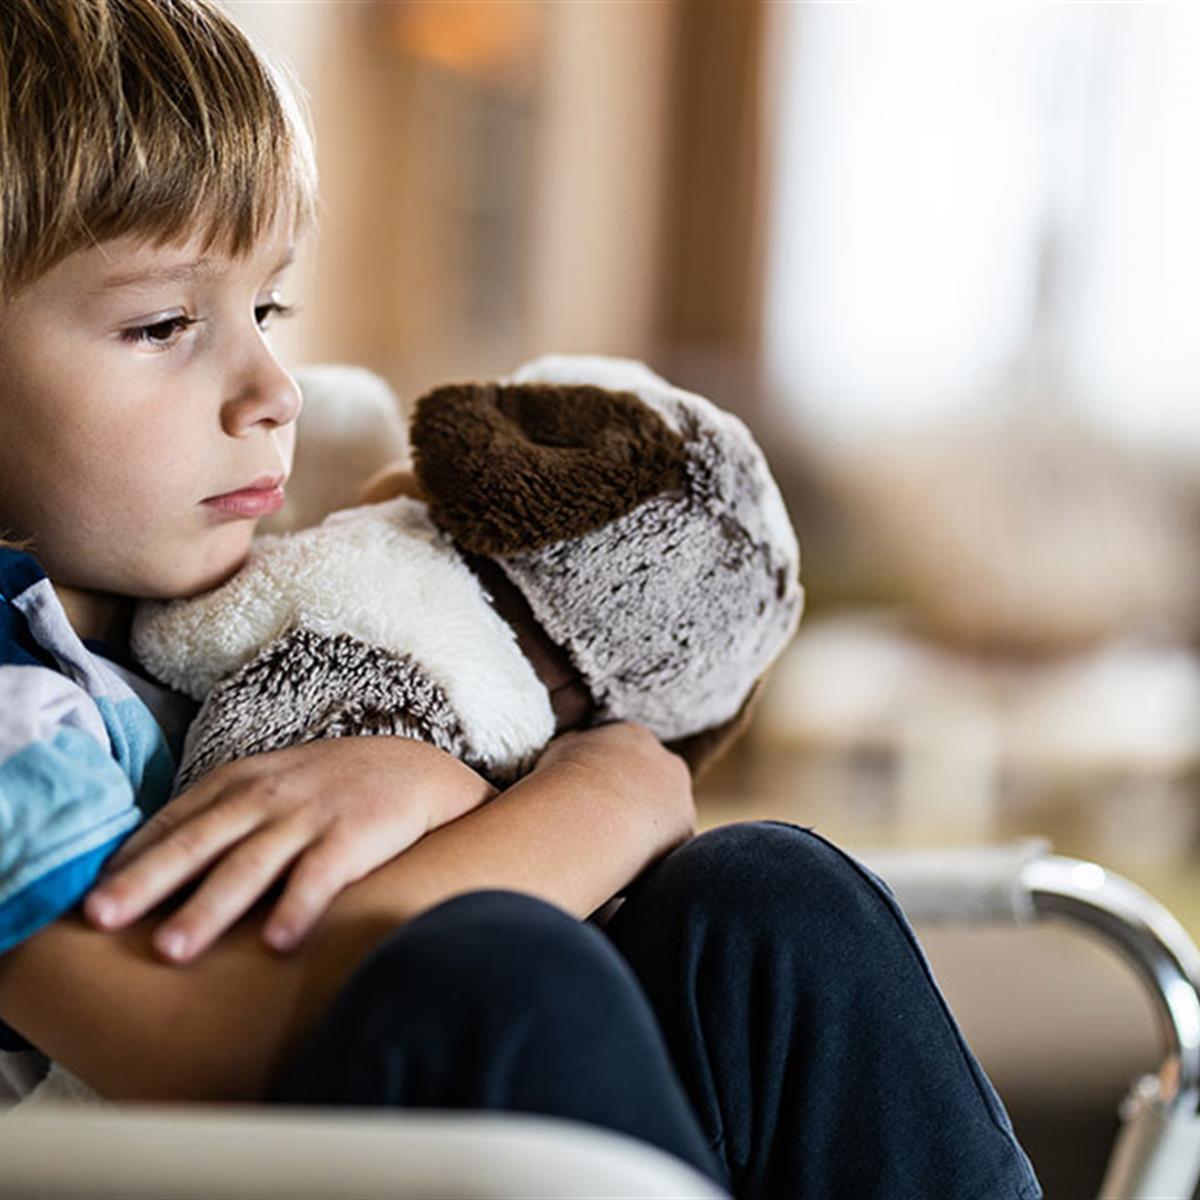 Emotional Issues and Potty Training Problems - HealthyChildren.org